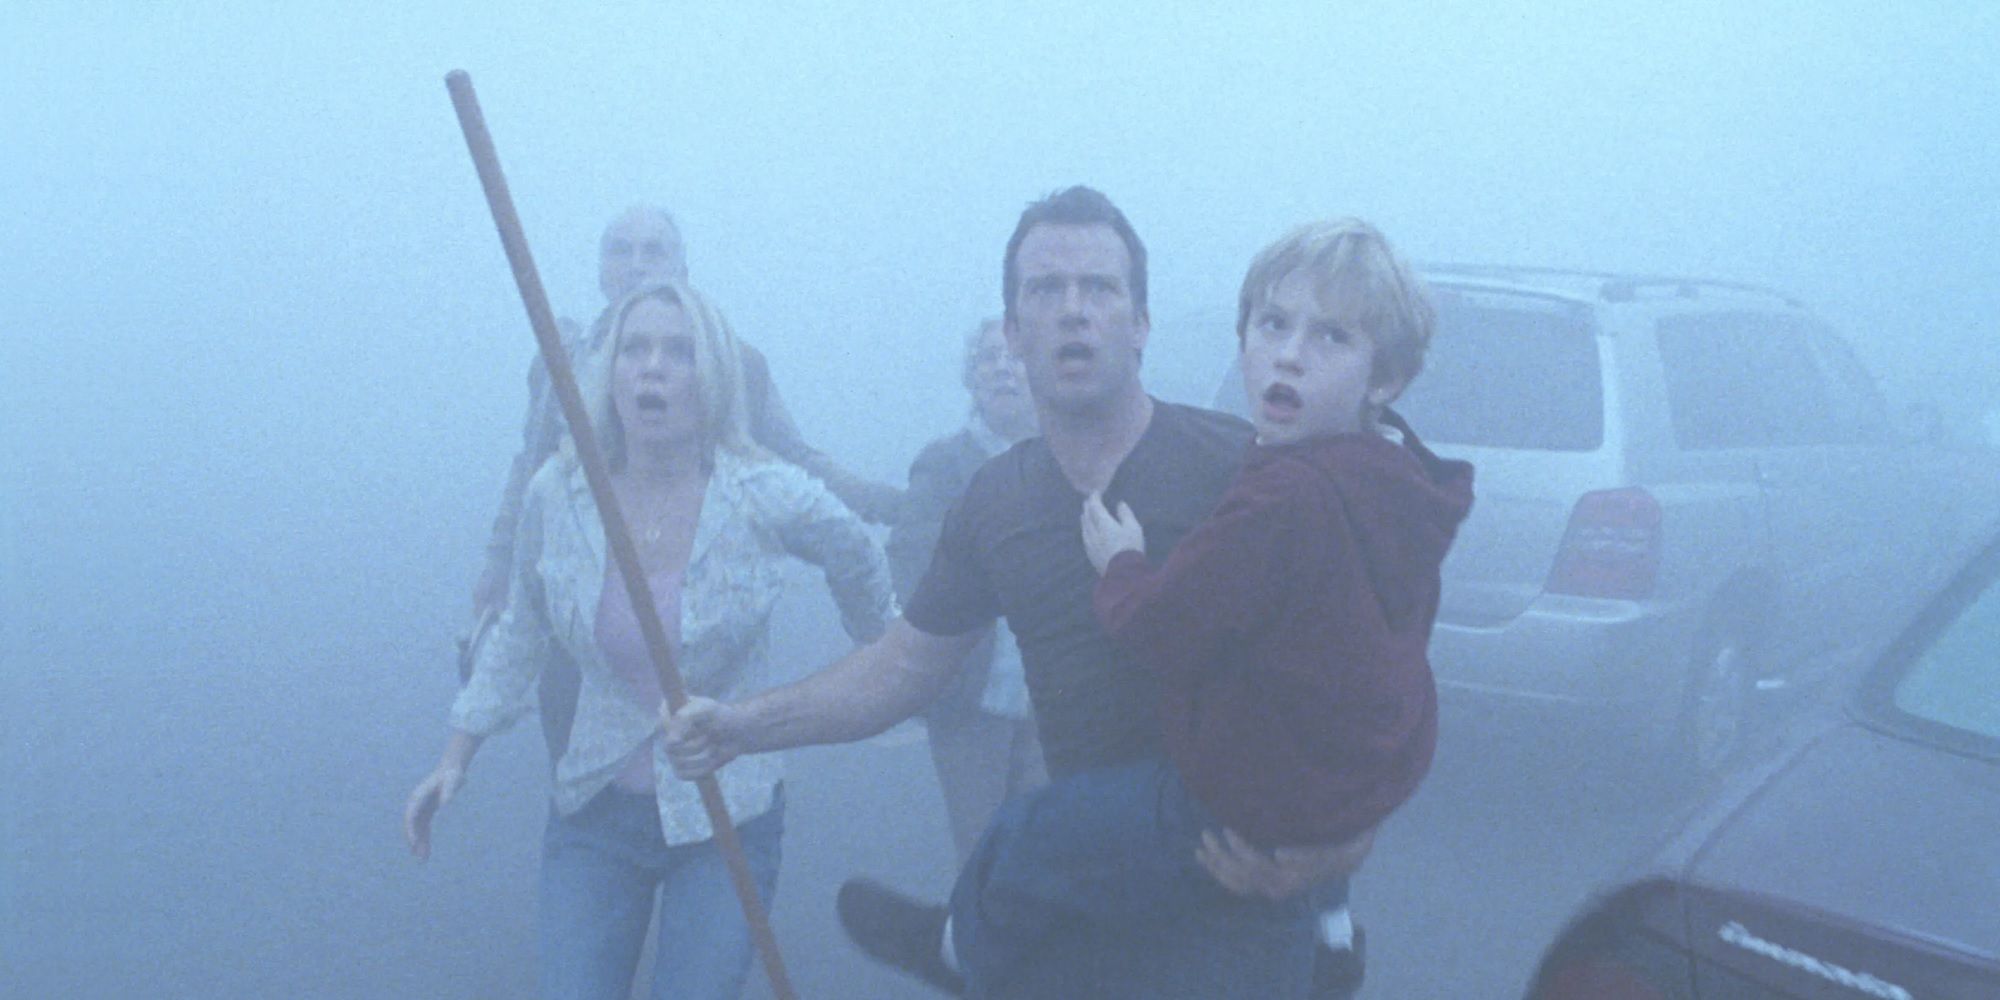 Characters from the Mist